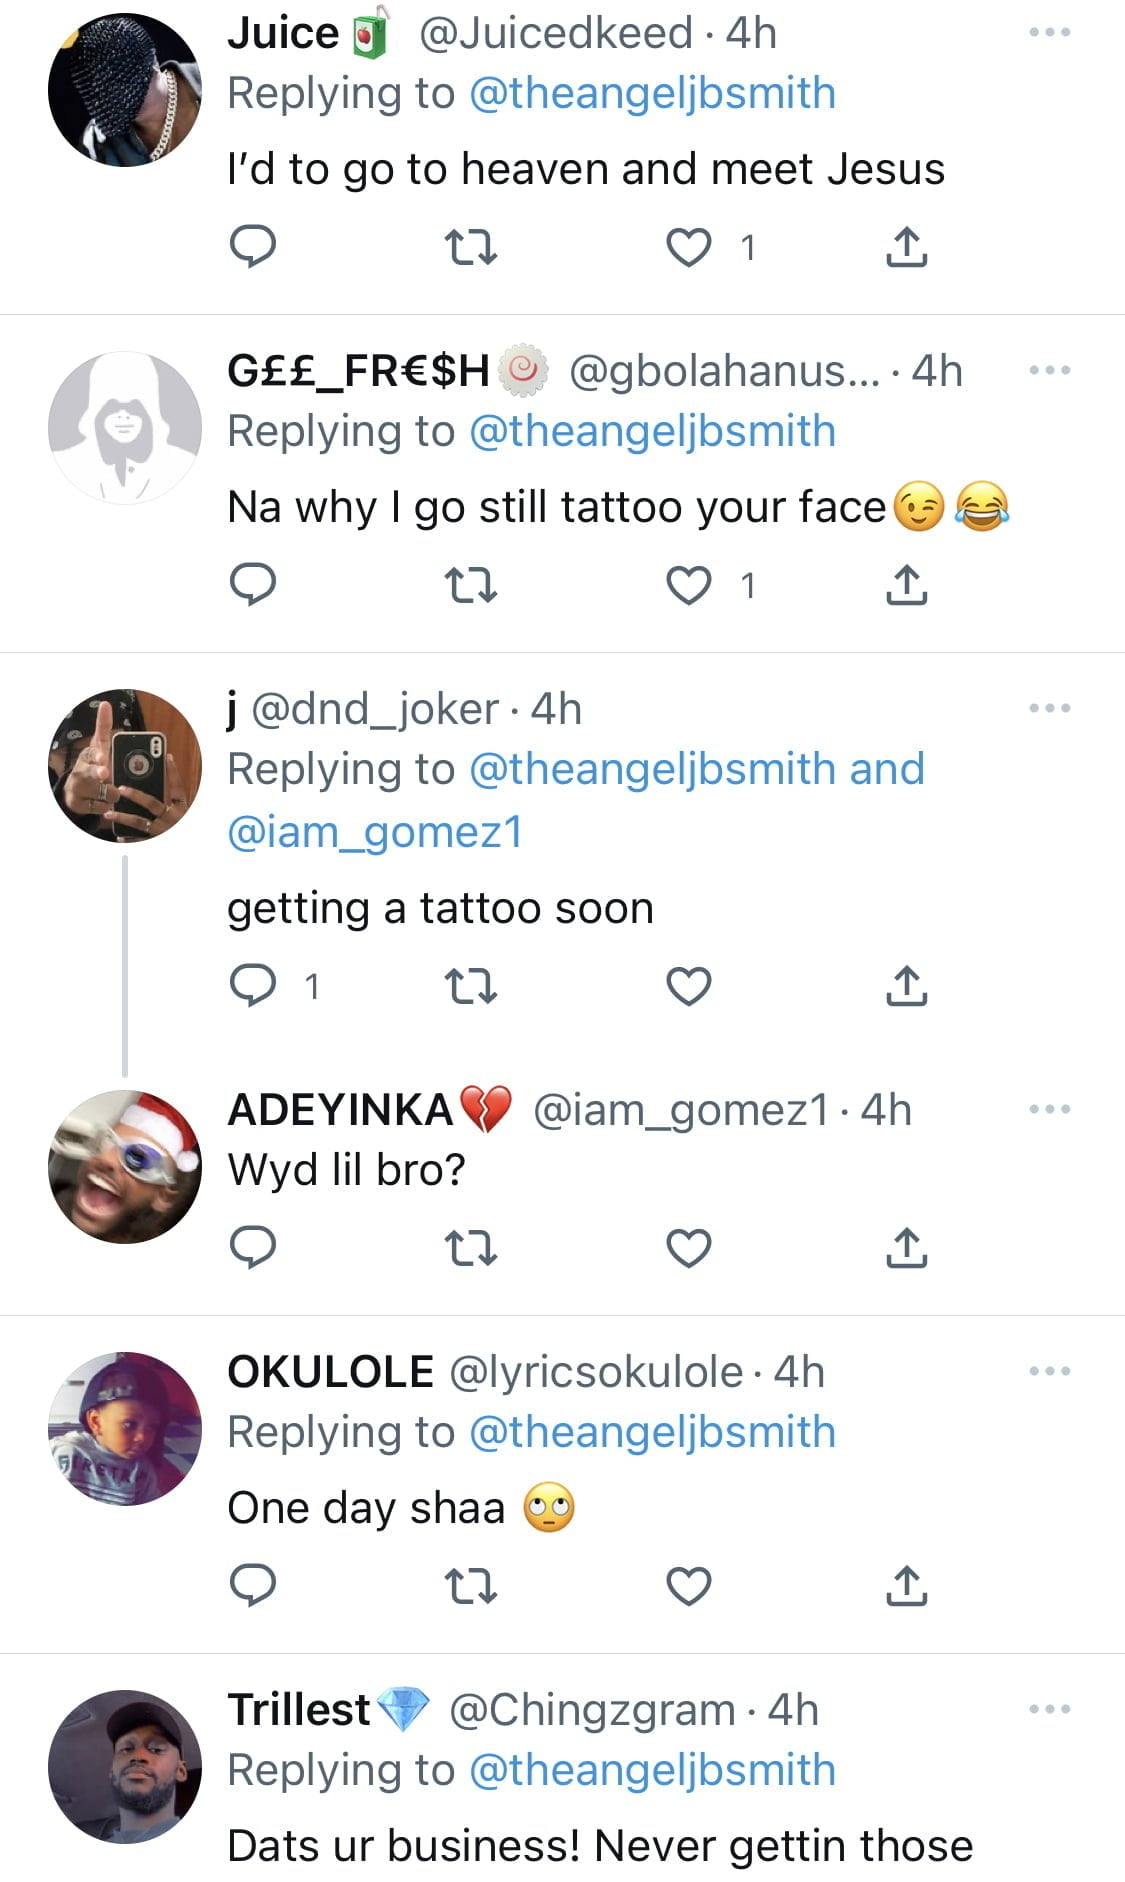 Any man who does not have tattoo is local - BBNaija Angel declares